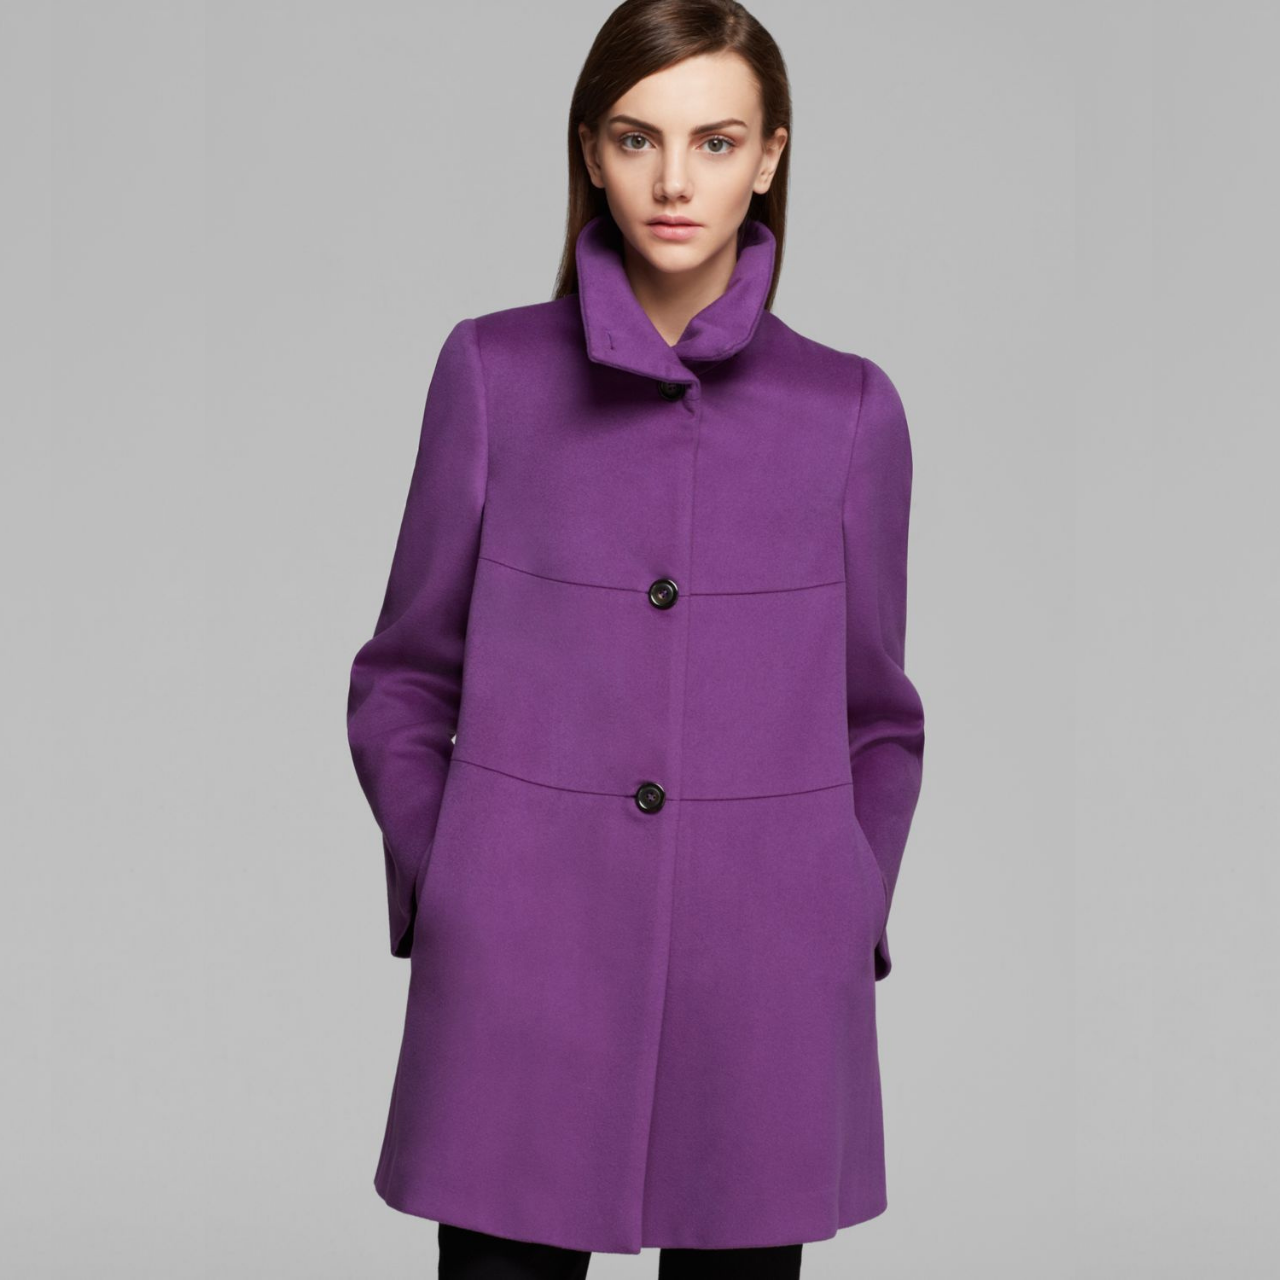 FASHION GUIDE: 5 Gorgeous Trench Coats You Will Never Regret Purchasing